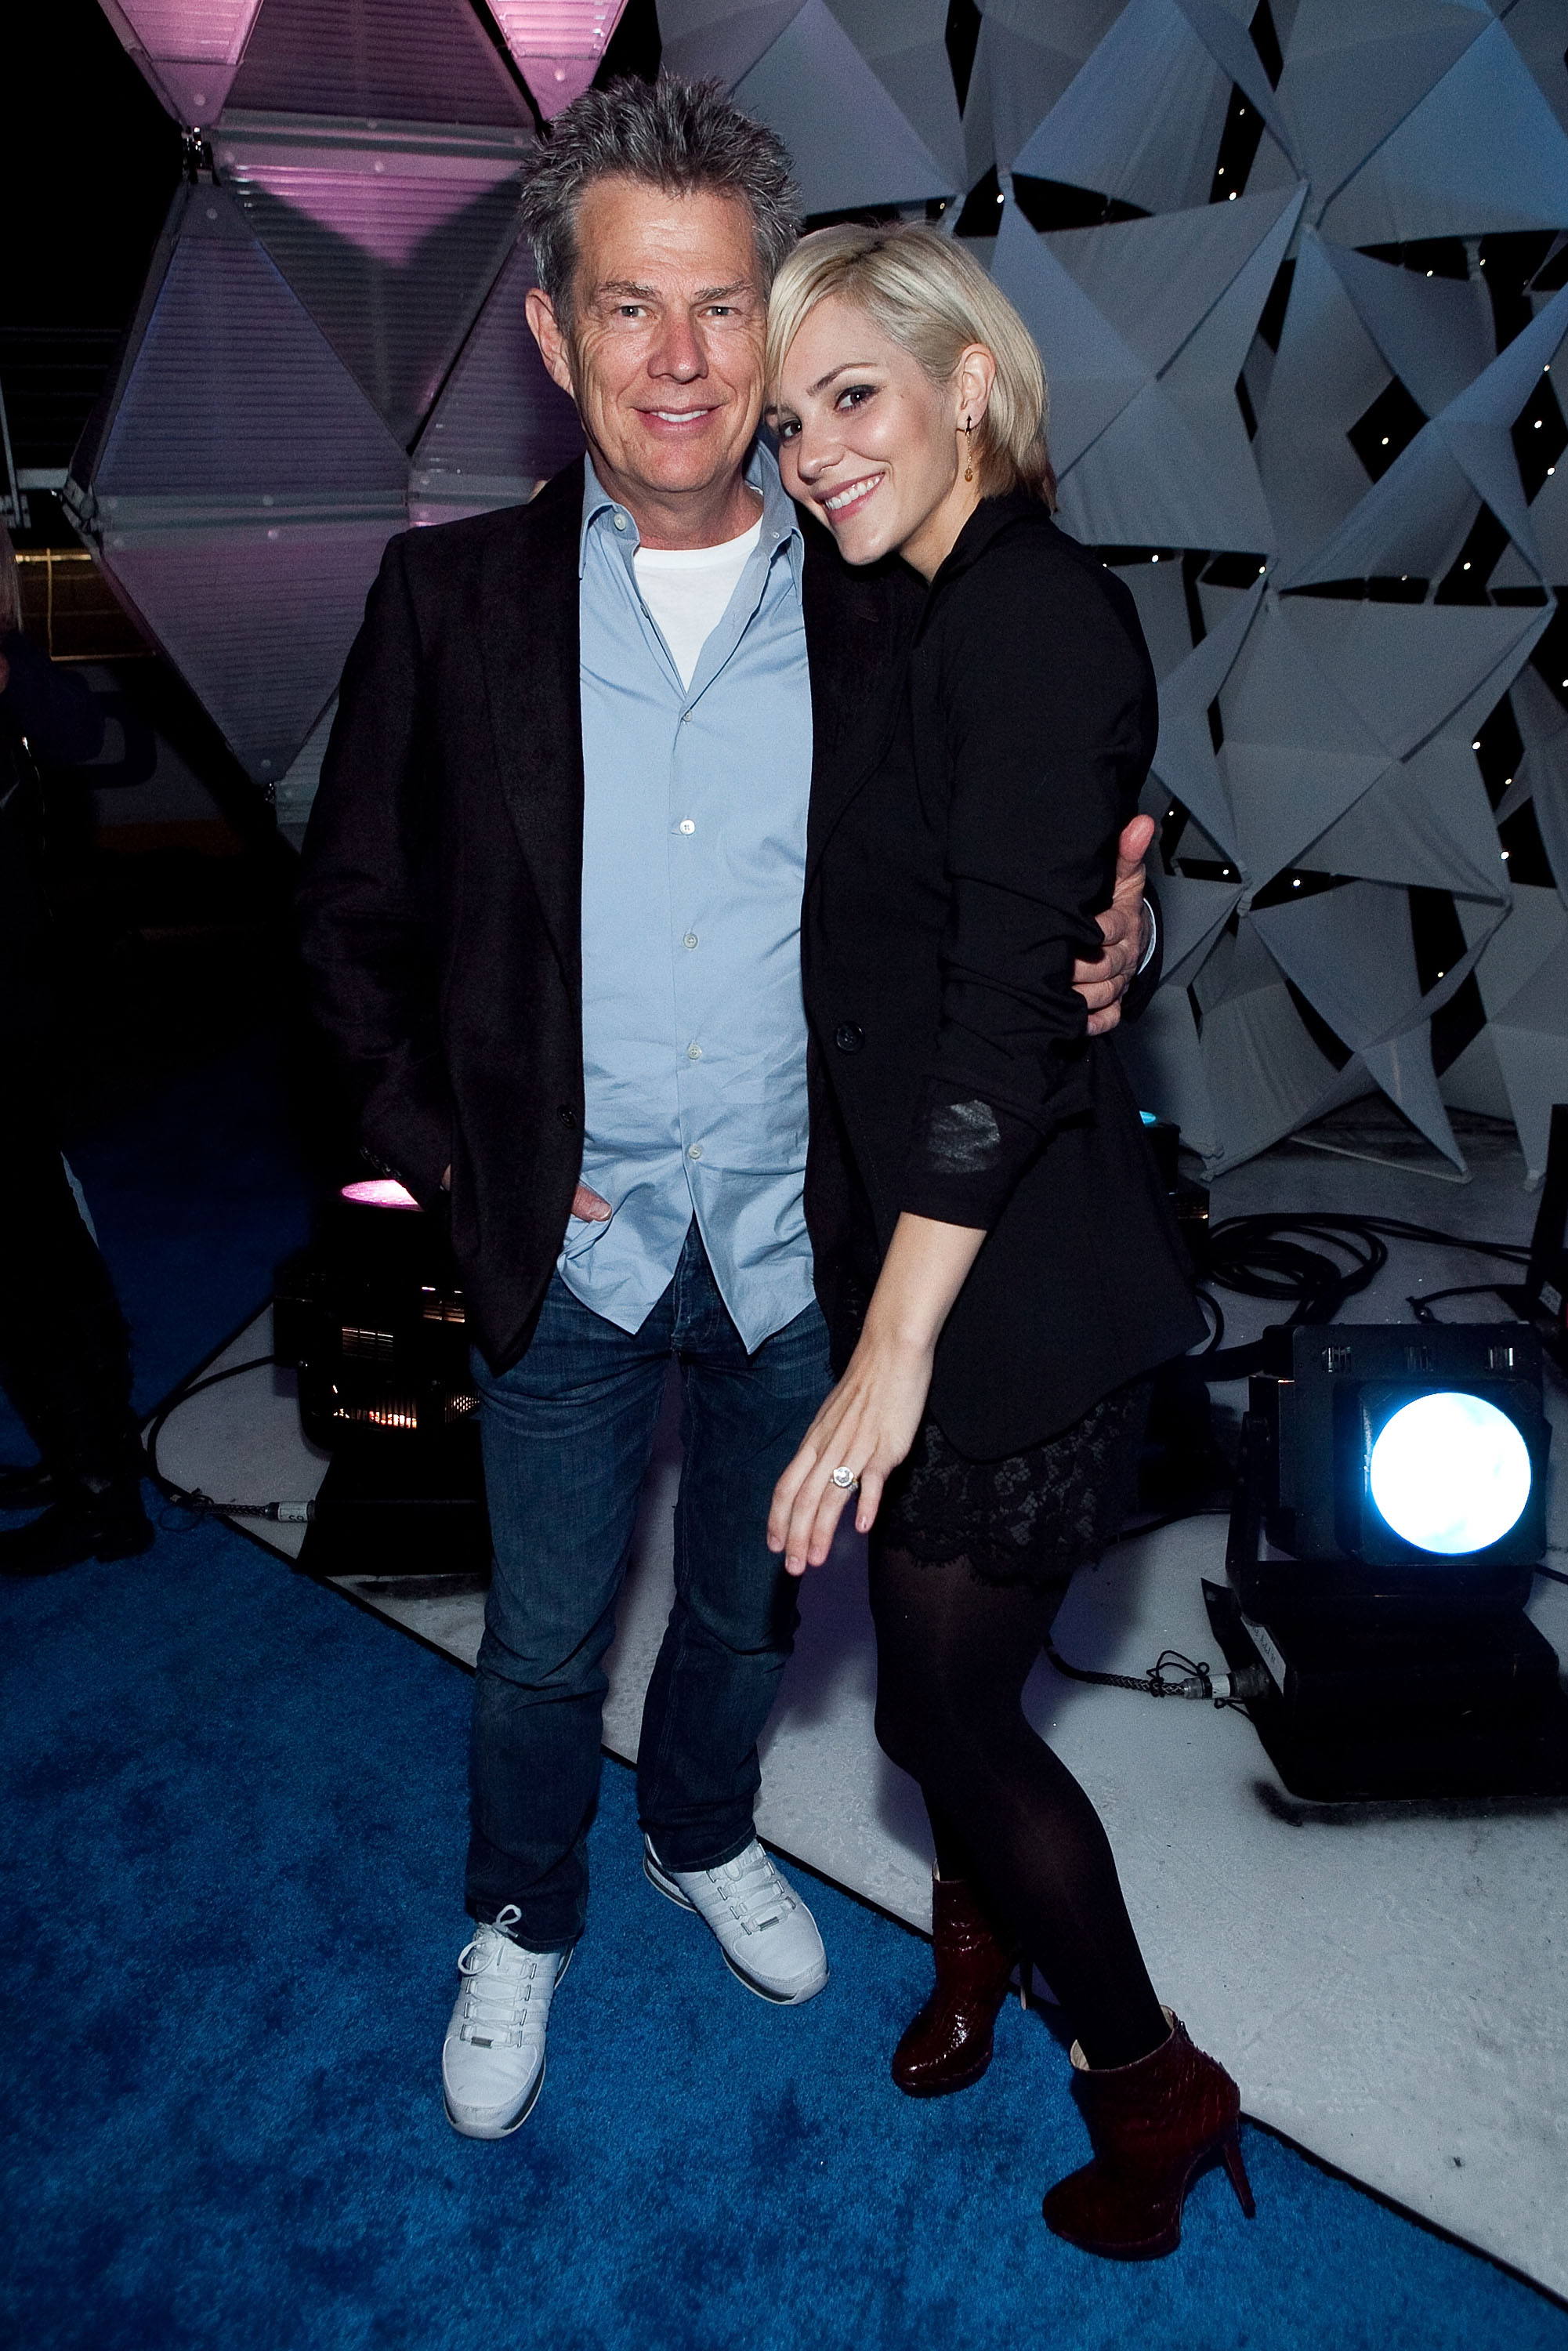 Music producer David Foster and singer-songwriter Katharine McPhee at the "Kaleidoscope" at Verizon Center on November 16, 2009 in Washington, DC. | Source: Getty Images